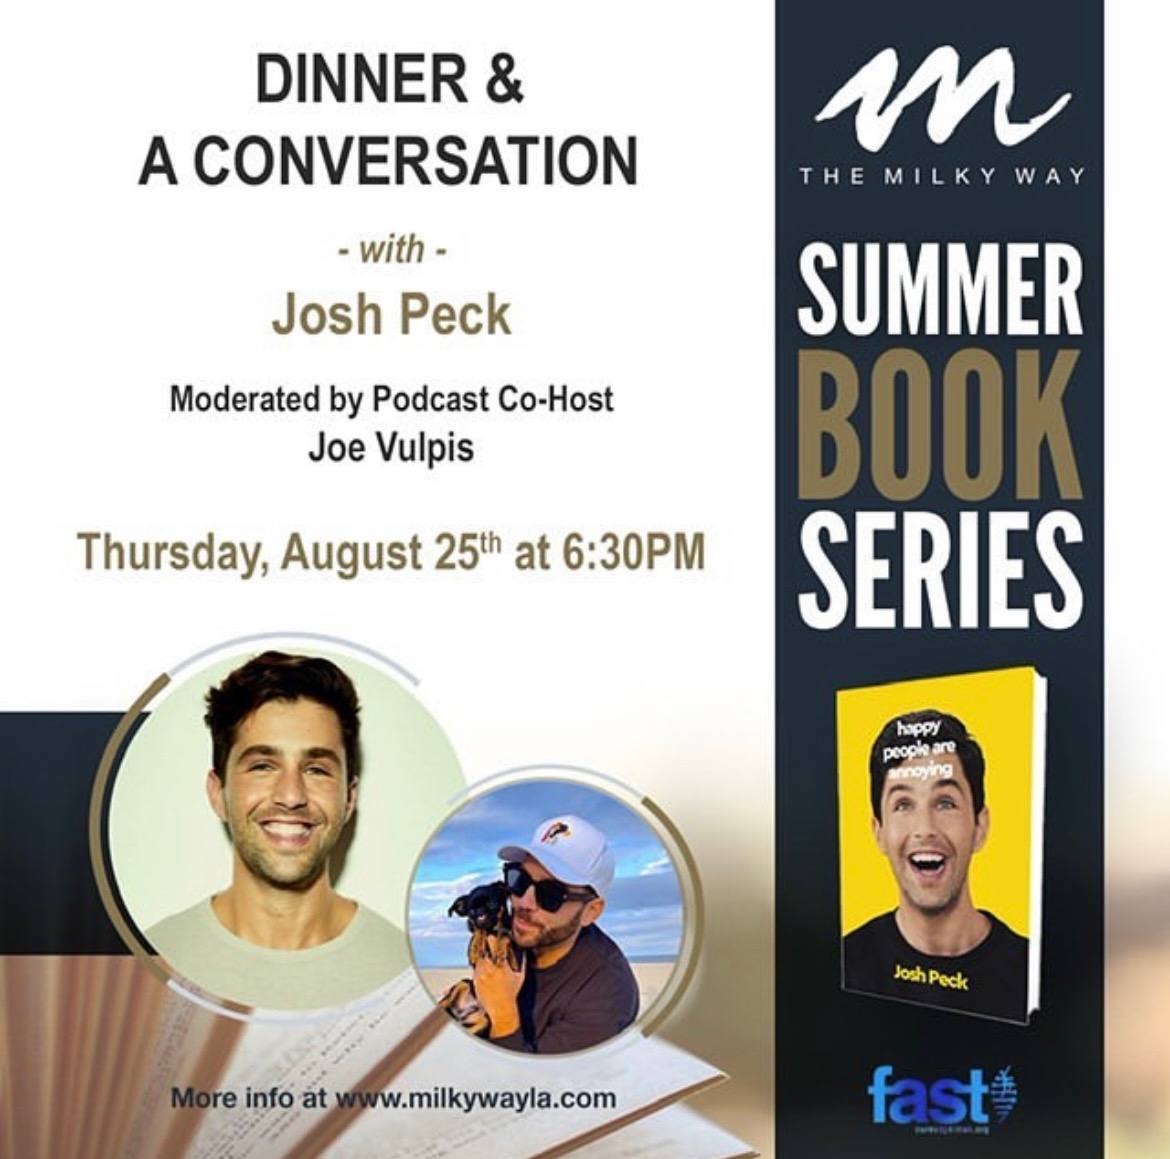 Join us at The Milky Way for Dinner and a Conversation with Josh Peck and Joe Vulpis.